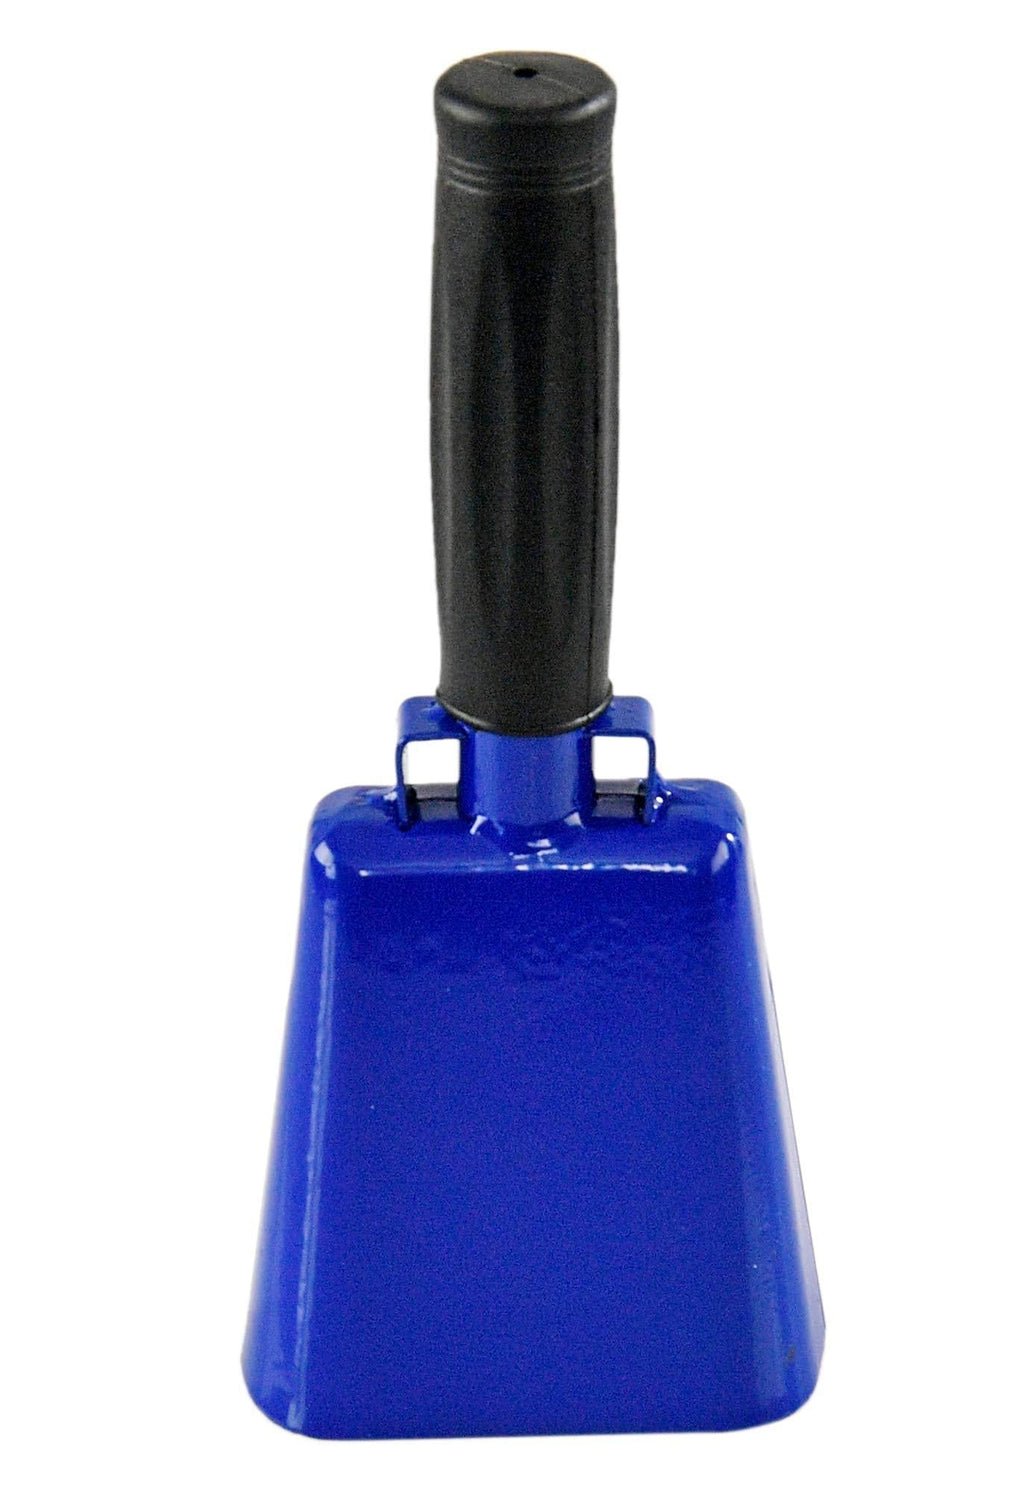 HOME-X Medium 8” Iron Cowbell with Sturdy Handle, Cheering, Sporting Event Bell, Blue, 8” L x 3 ½” W x 2” H